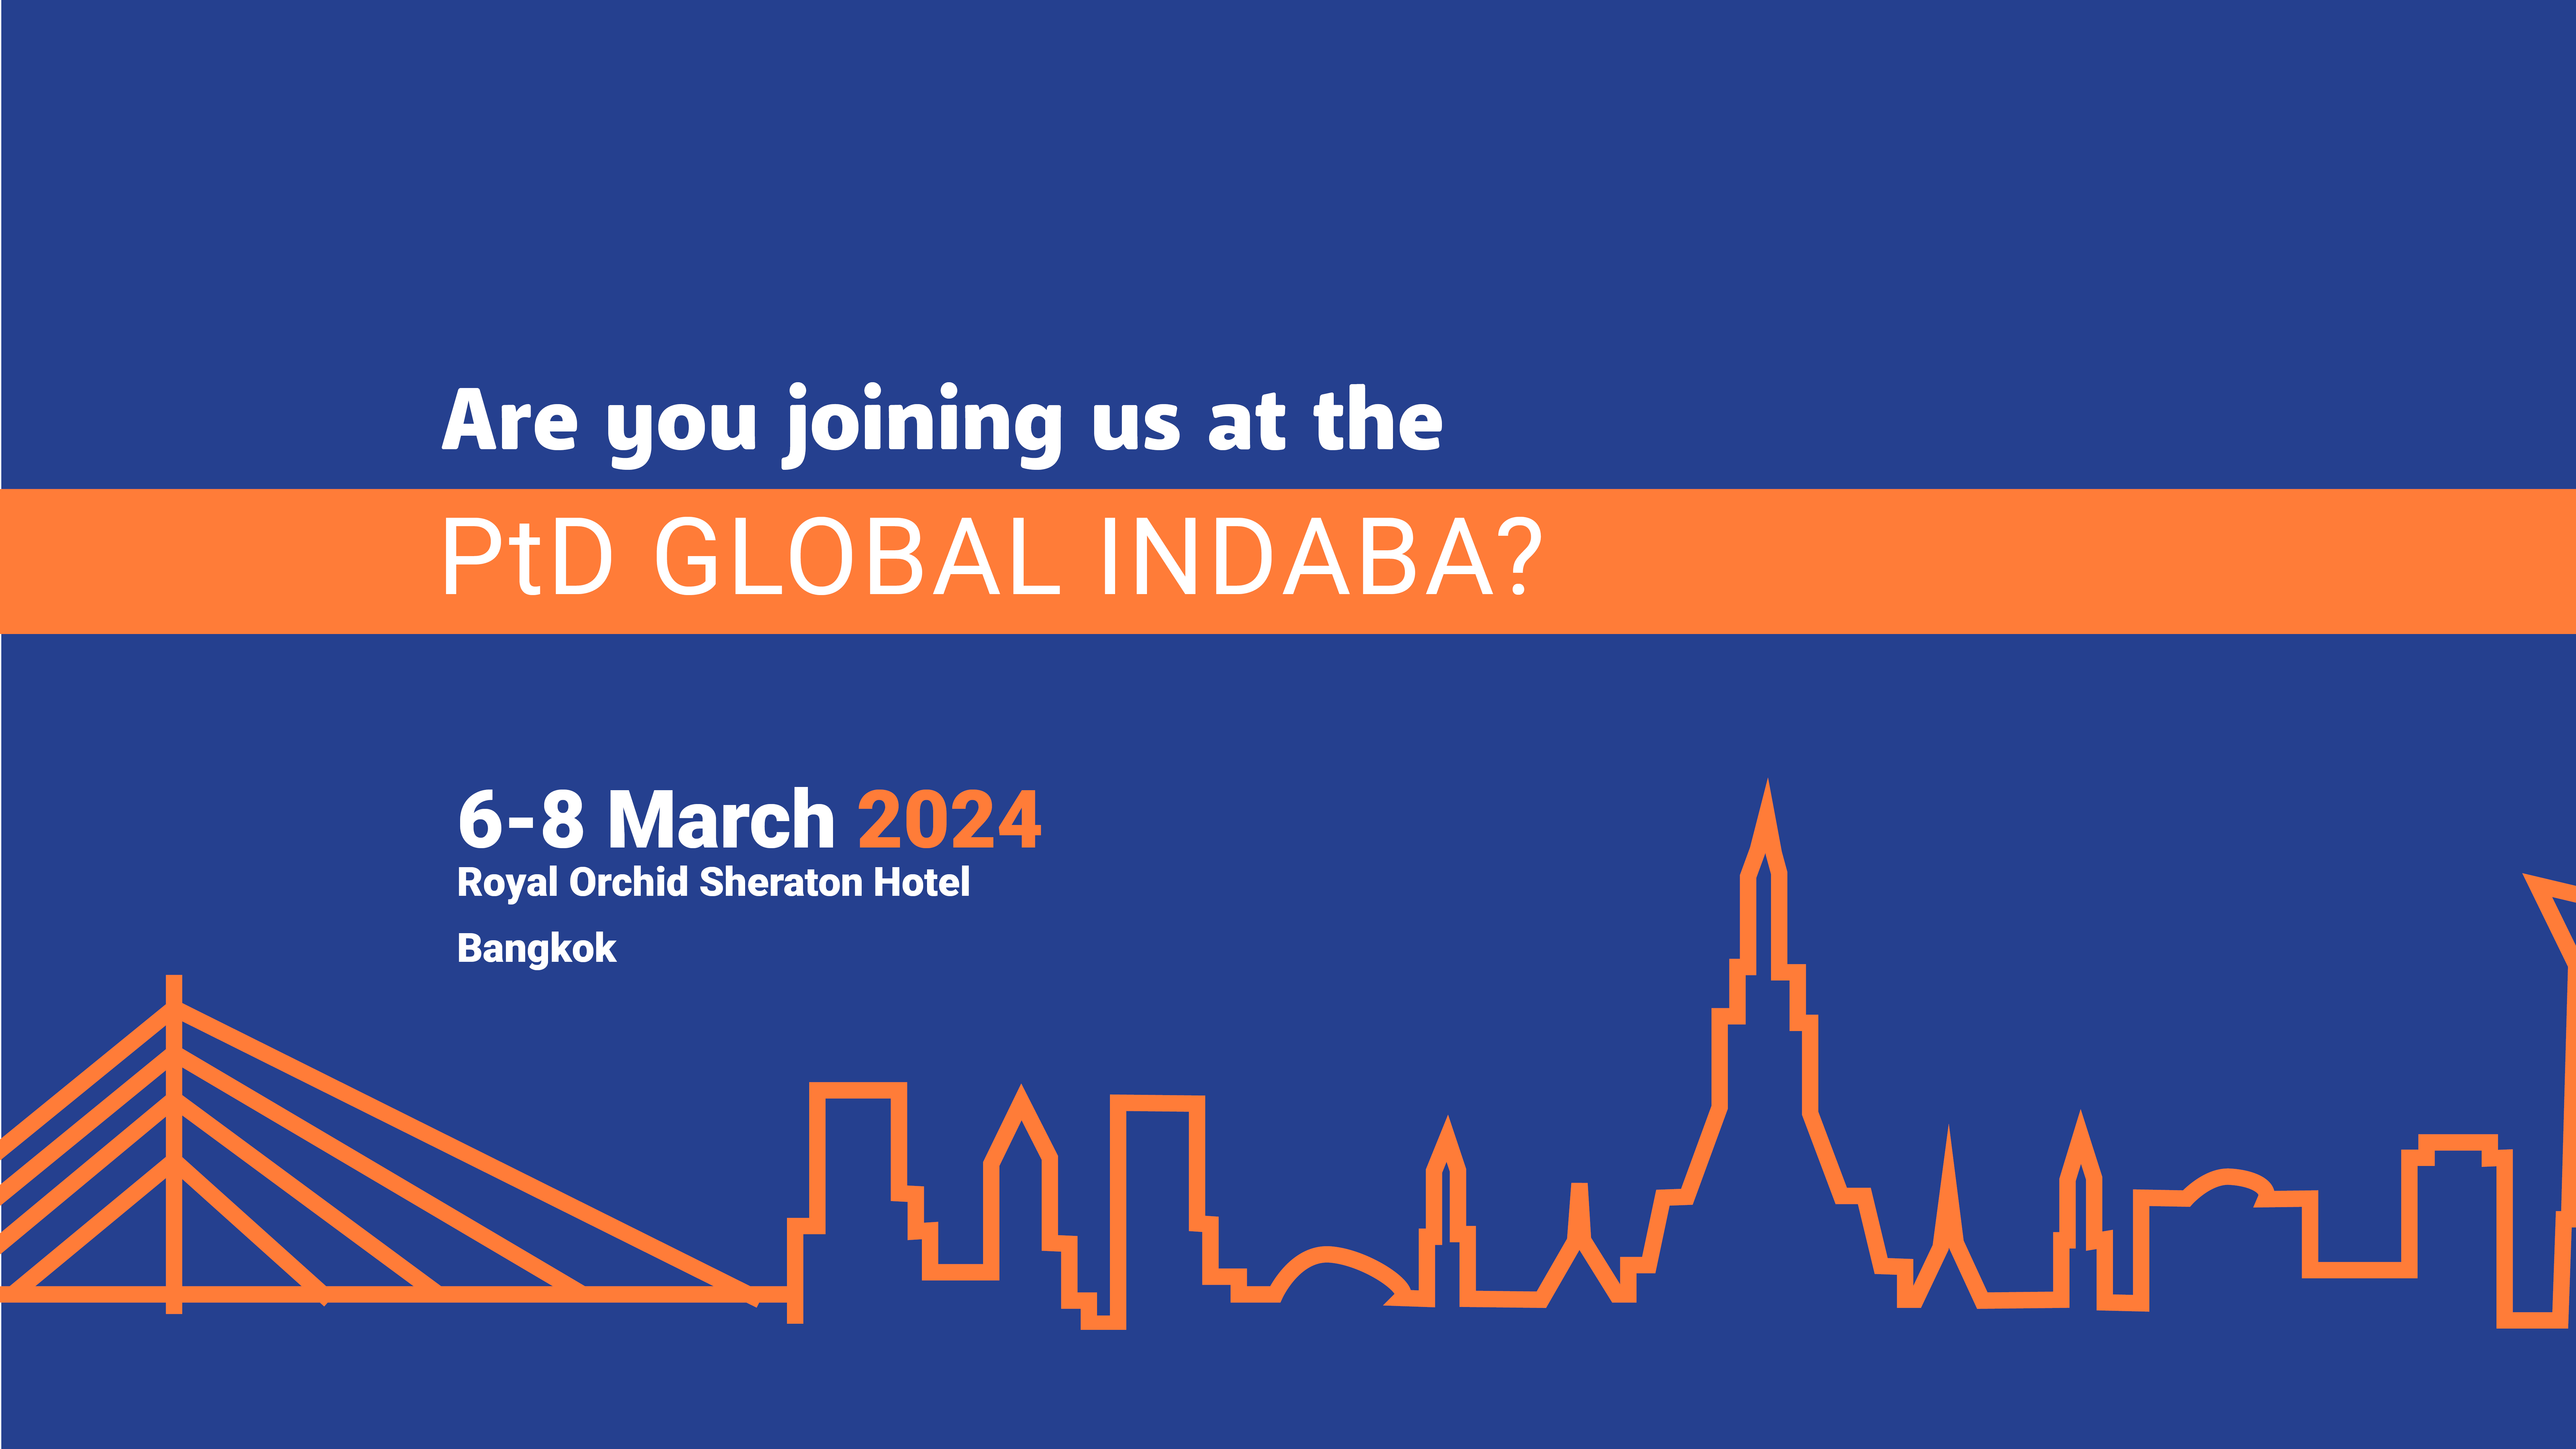 Are you joining us at the PtD Global Indaba?